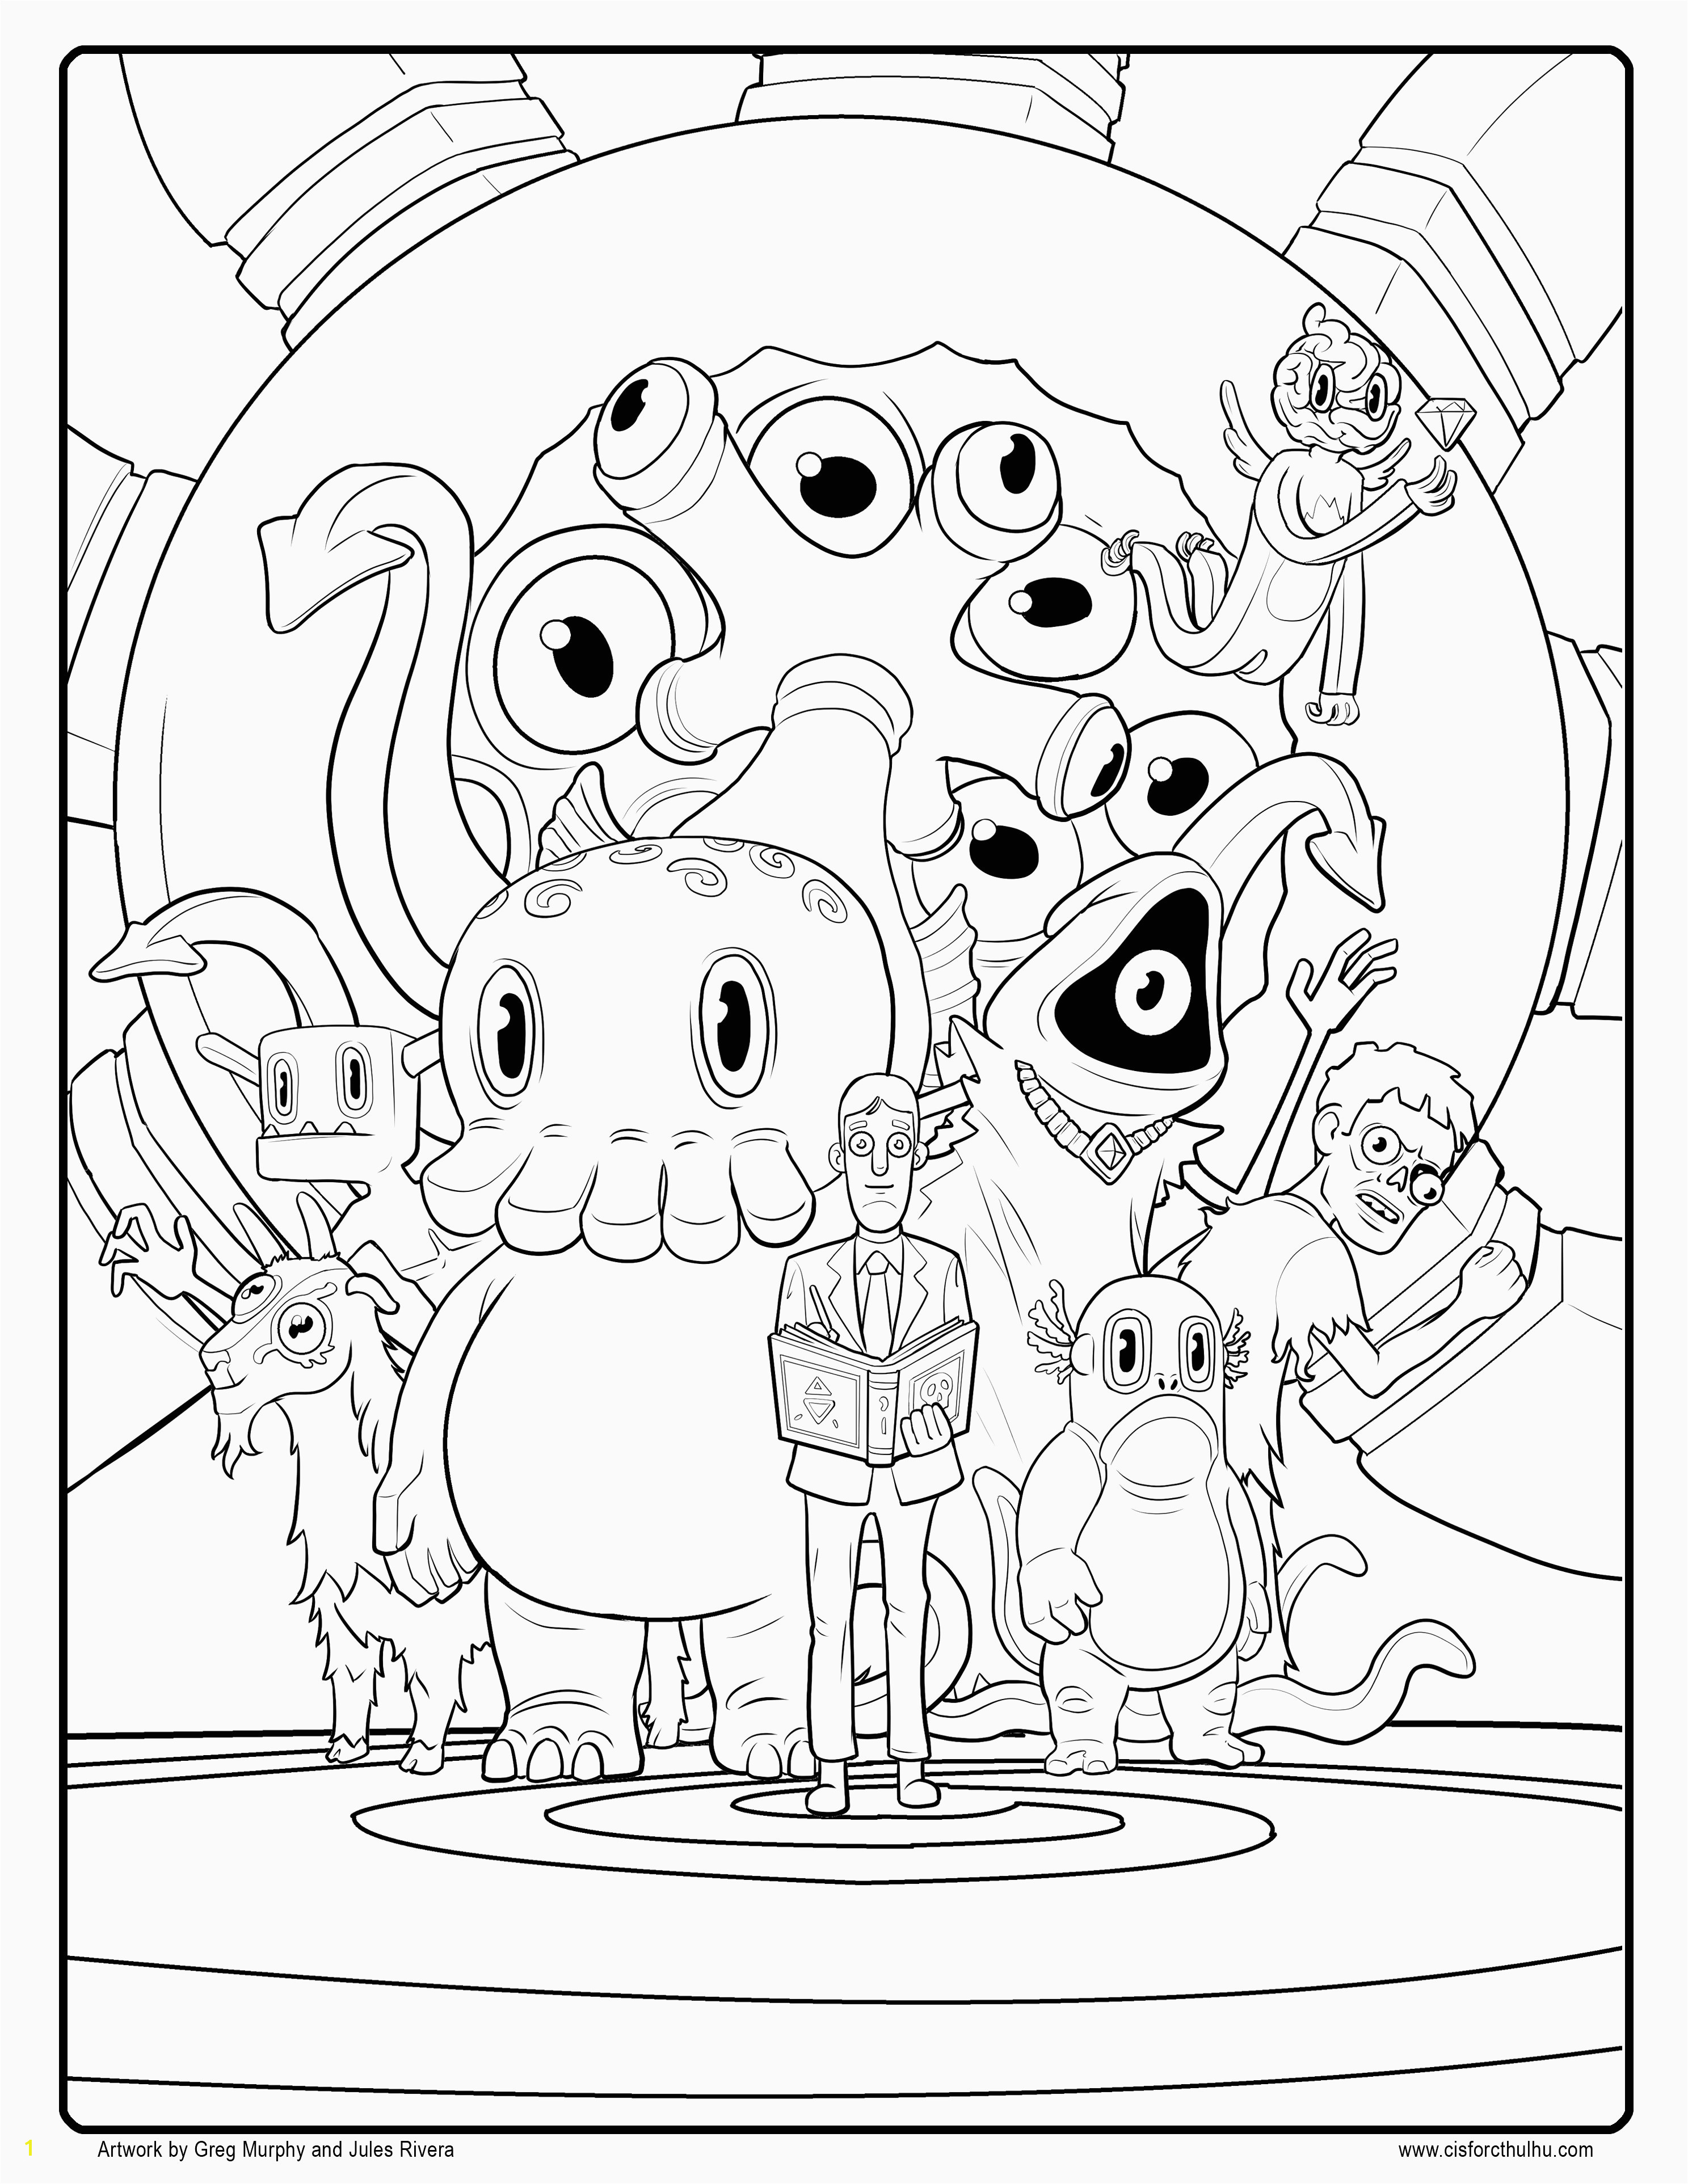 Be Ye Kind One to Another Coloring Page Transformer Coloring Pages Sample thephotosync